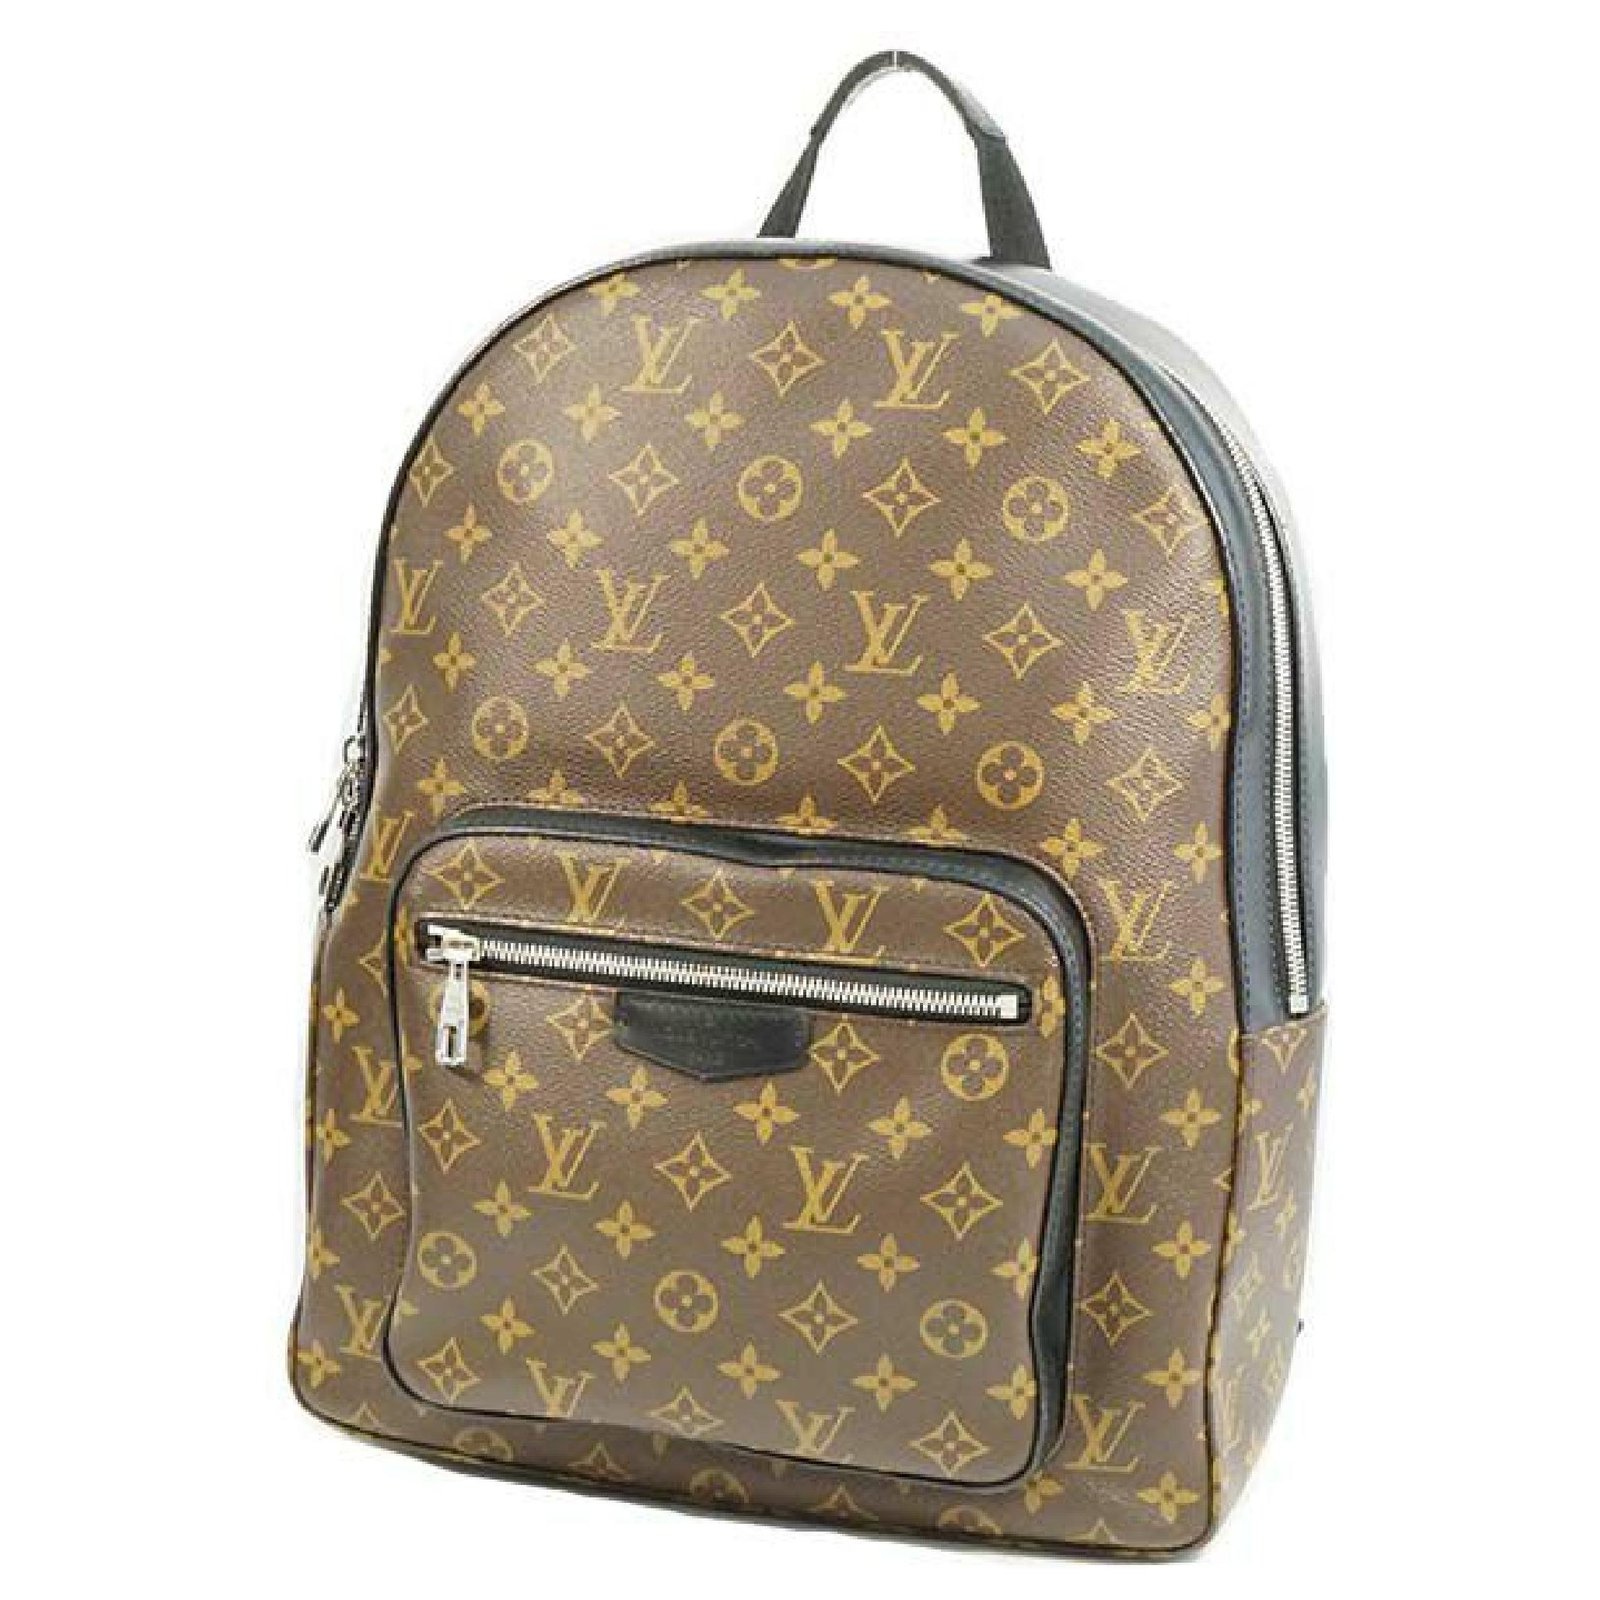 Louis Vuitton Josh Backpack Mens ruck sack Daypack M41530 Leather